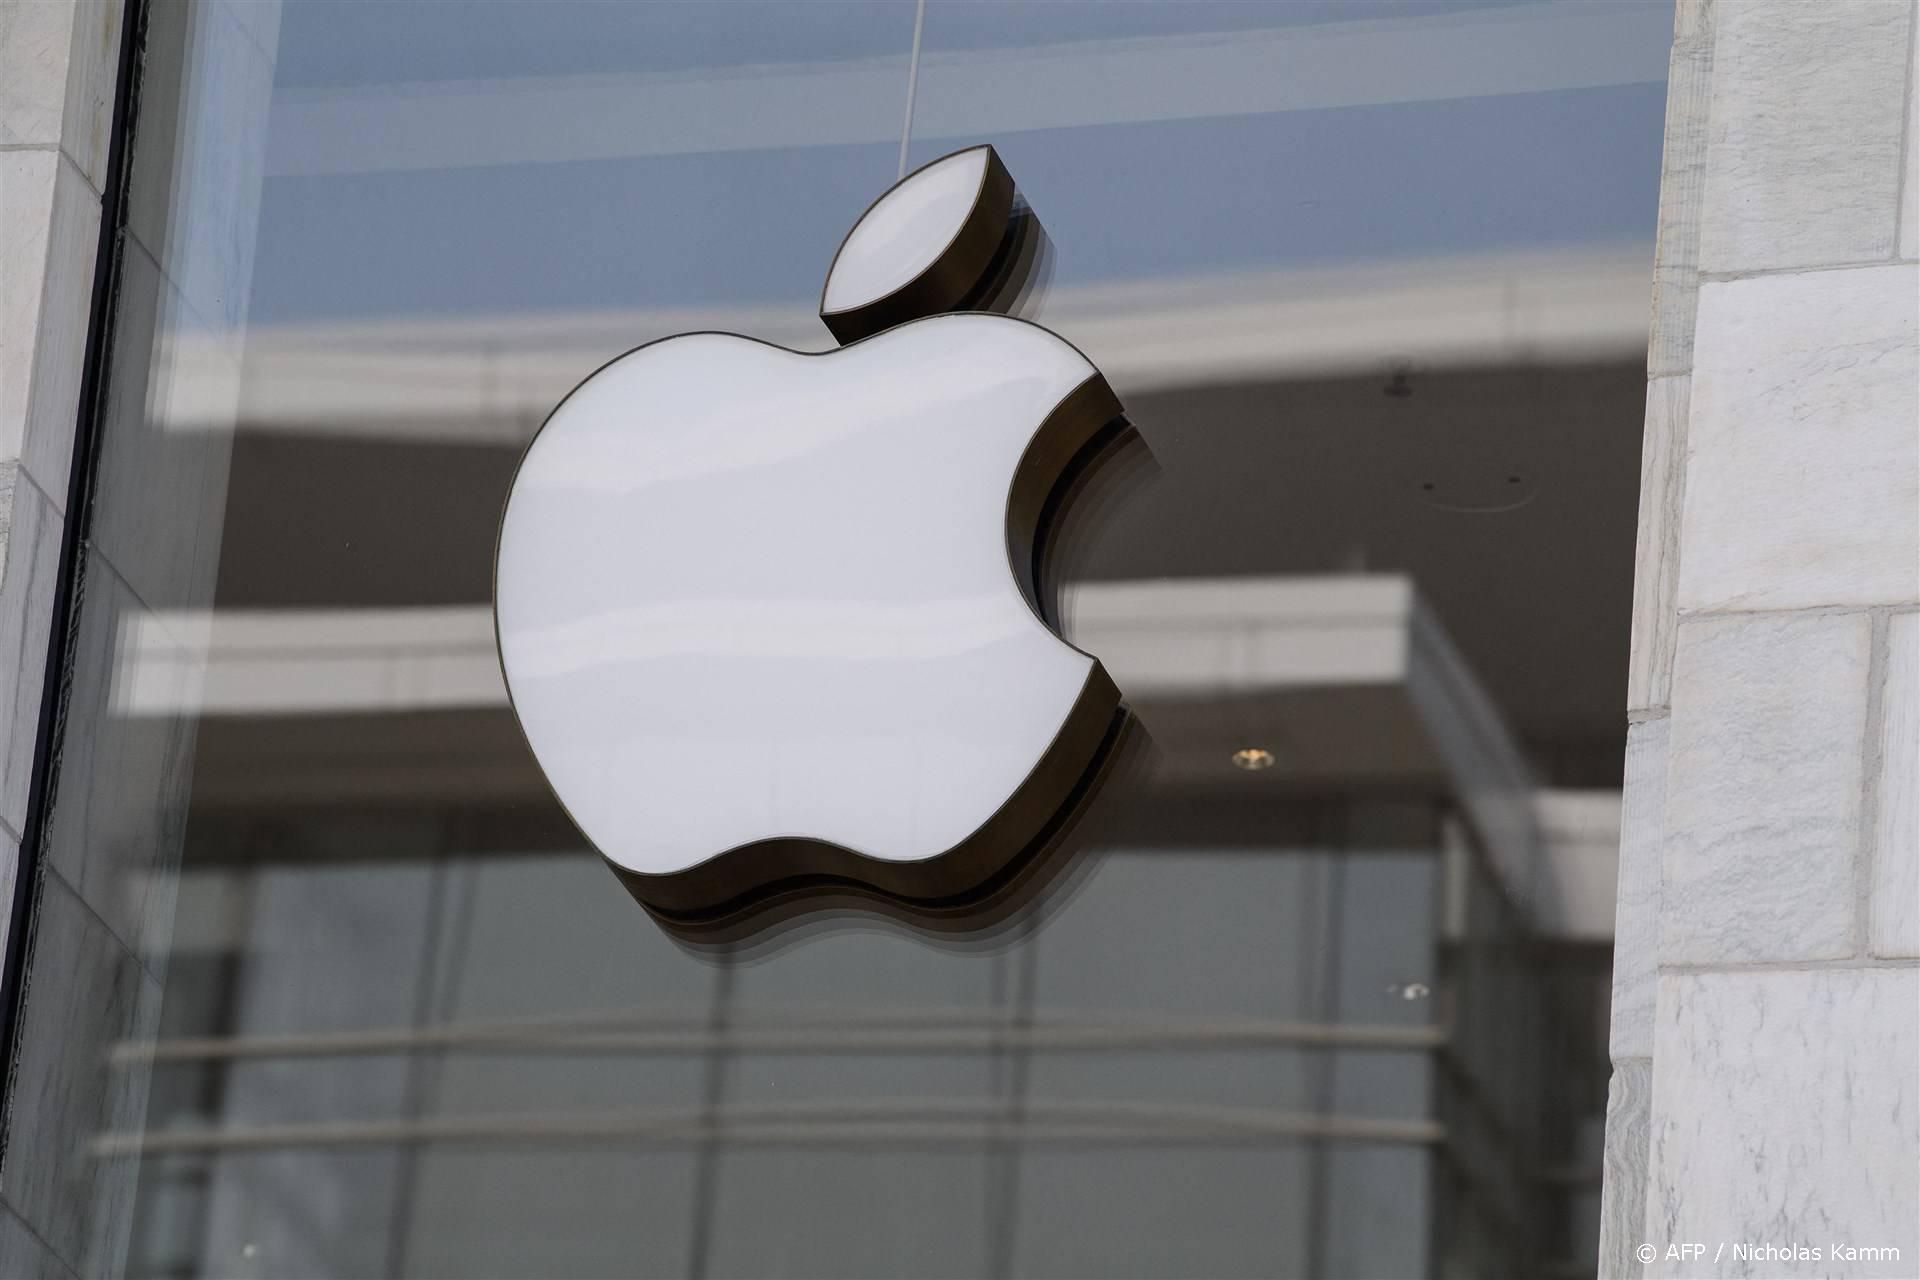 2021-09-14 18:08:10 The Apple logo is seen at the entrance of an Apple store in Washington, DC, on September 14, 2021. Apple users were urged on Tuesday to update their devices after the tech giant announced a fix for a major software flaw that allows the Pegasus spyware to be installed on phones without so much as a click.
Nicholas Kamm / AFP